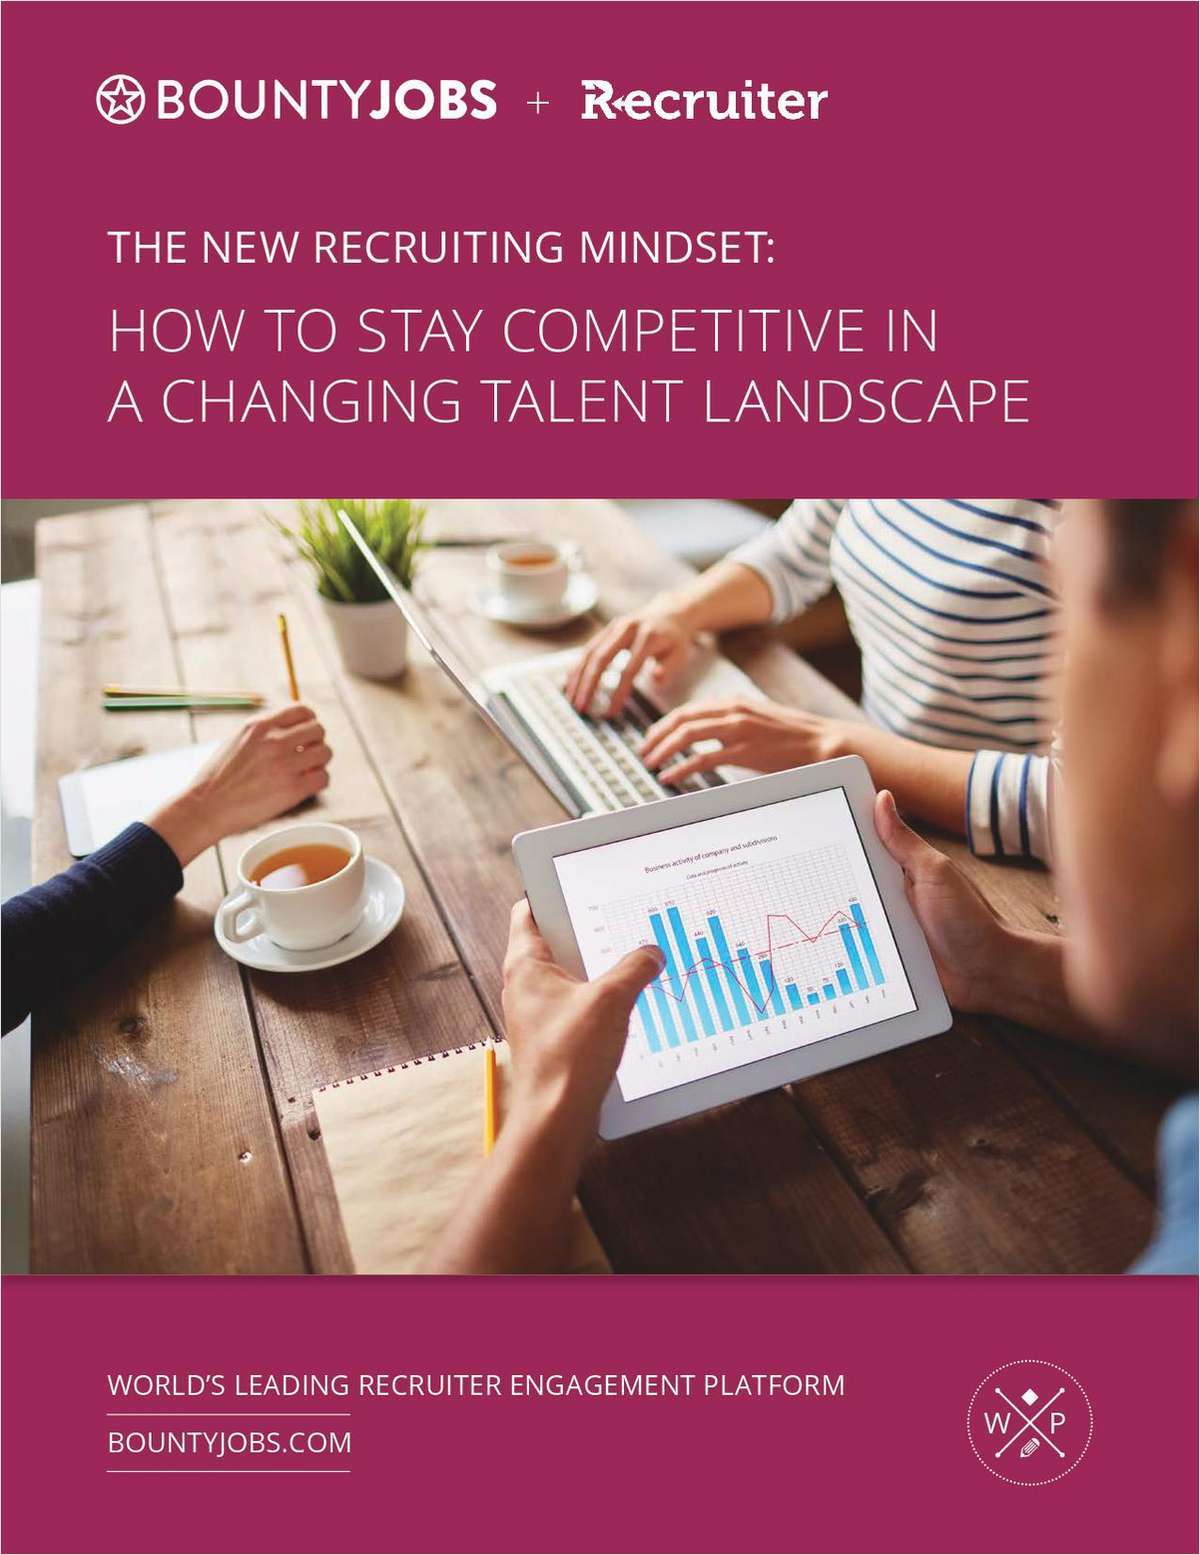 How to Stay Competitive in a Changing Talent Landscape